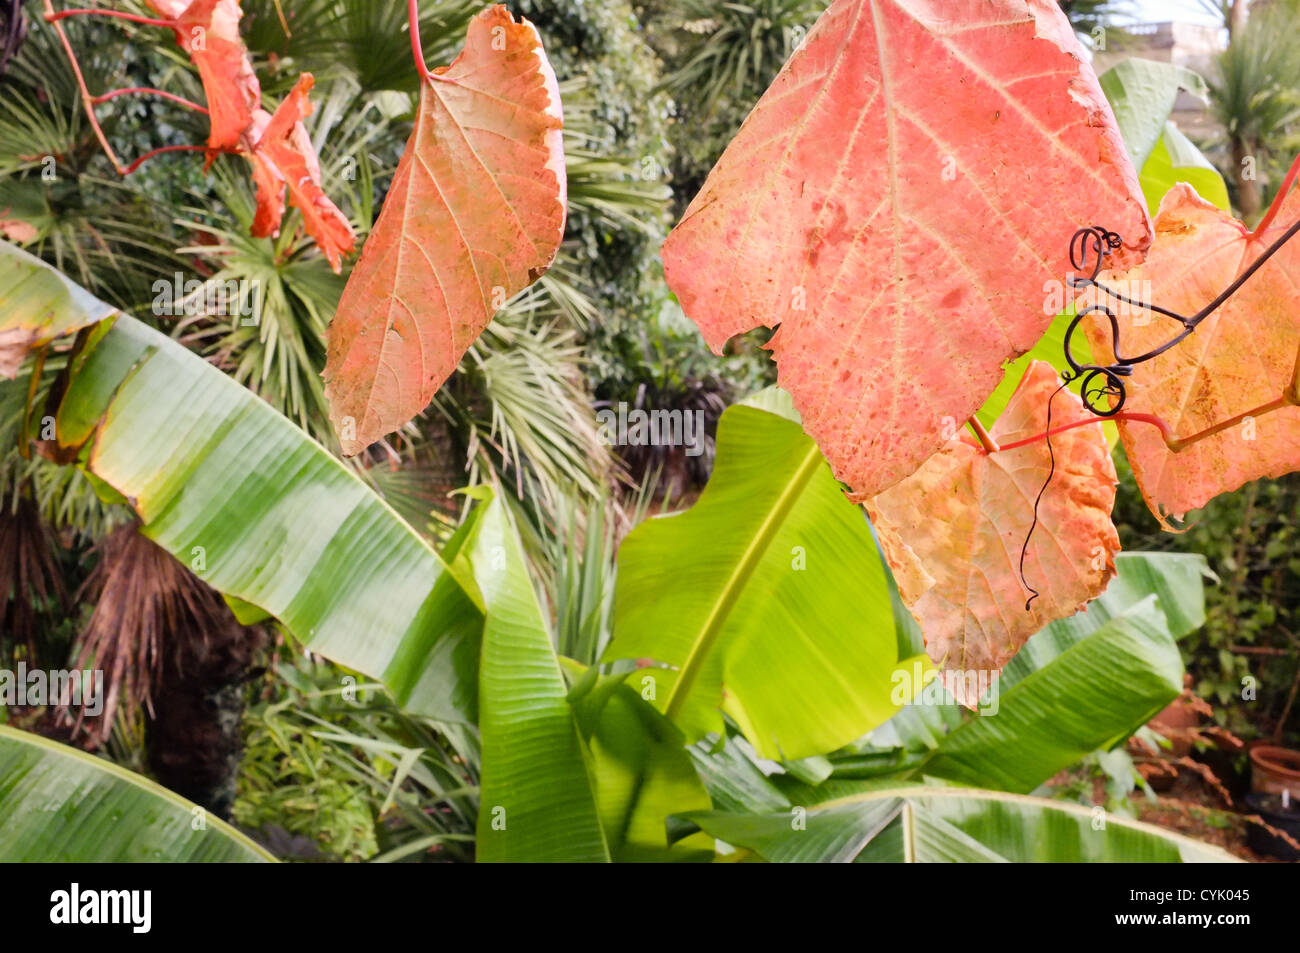 Parthenocissus quinquefolia, known as Virginia creeper (Top / Red) with the Banana, Musa Basjoo leaves below. Stock Photo